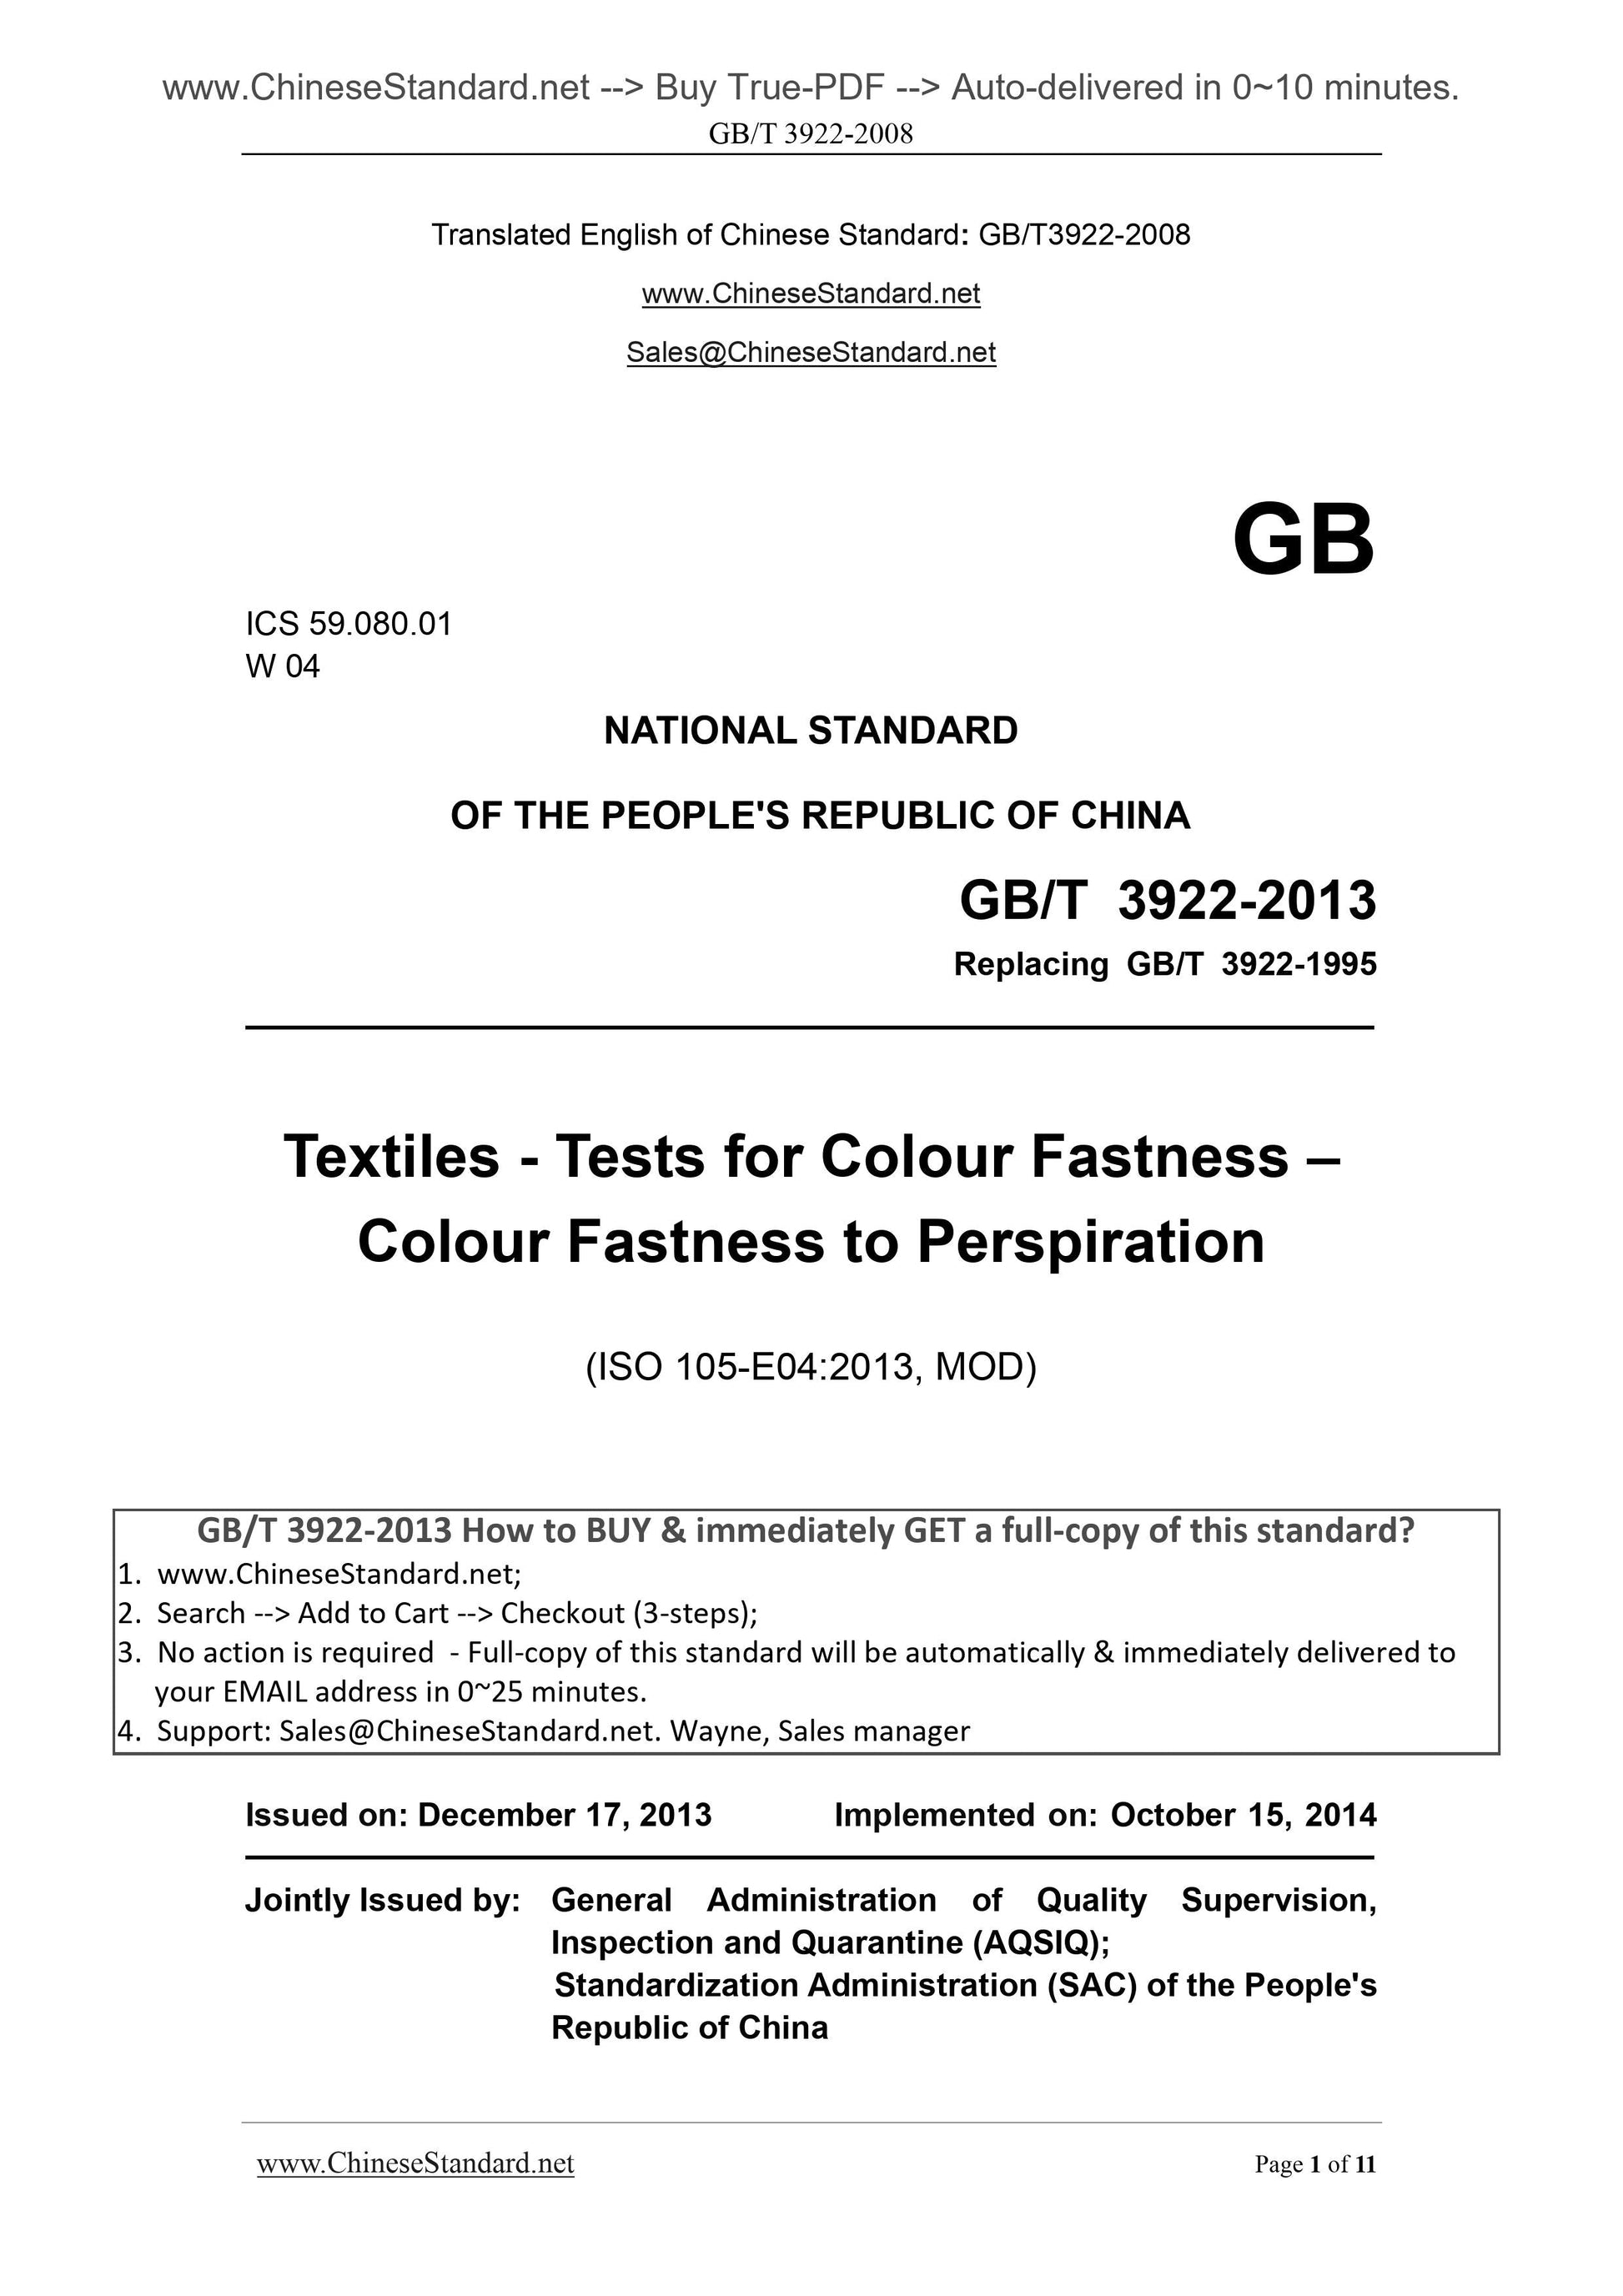 GB/T 3922-2013 Page 1